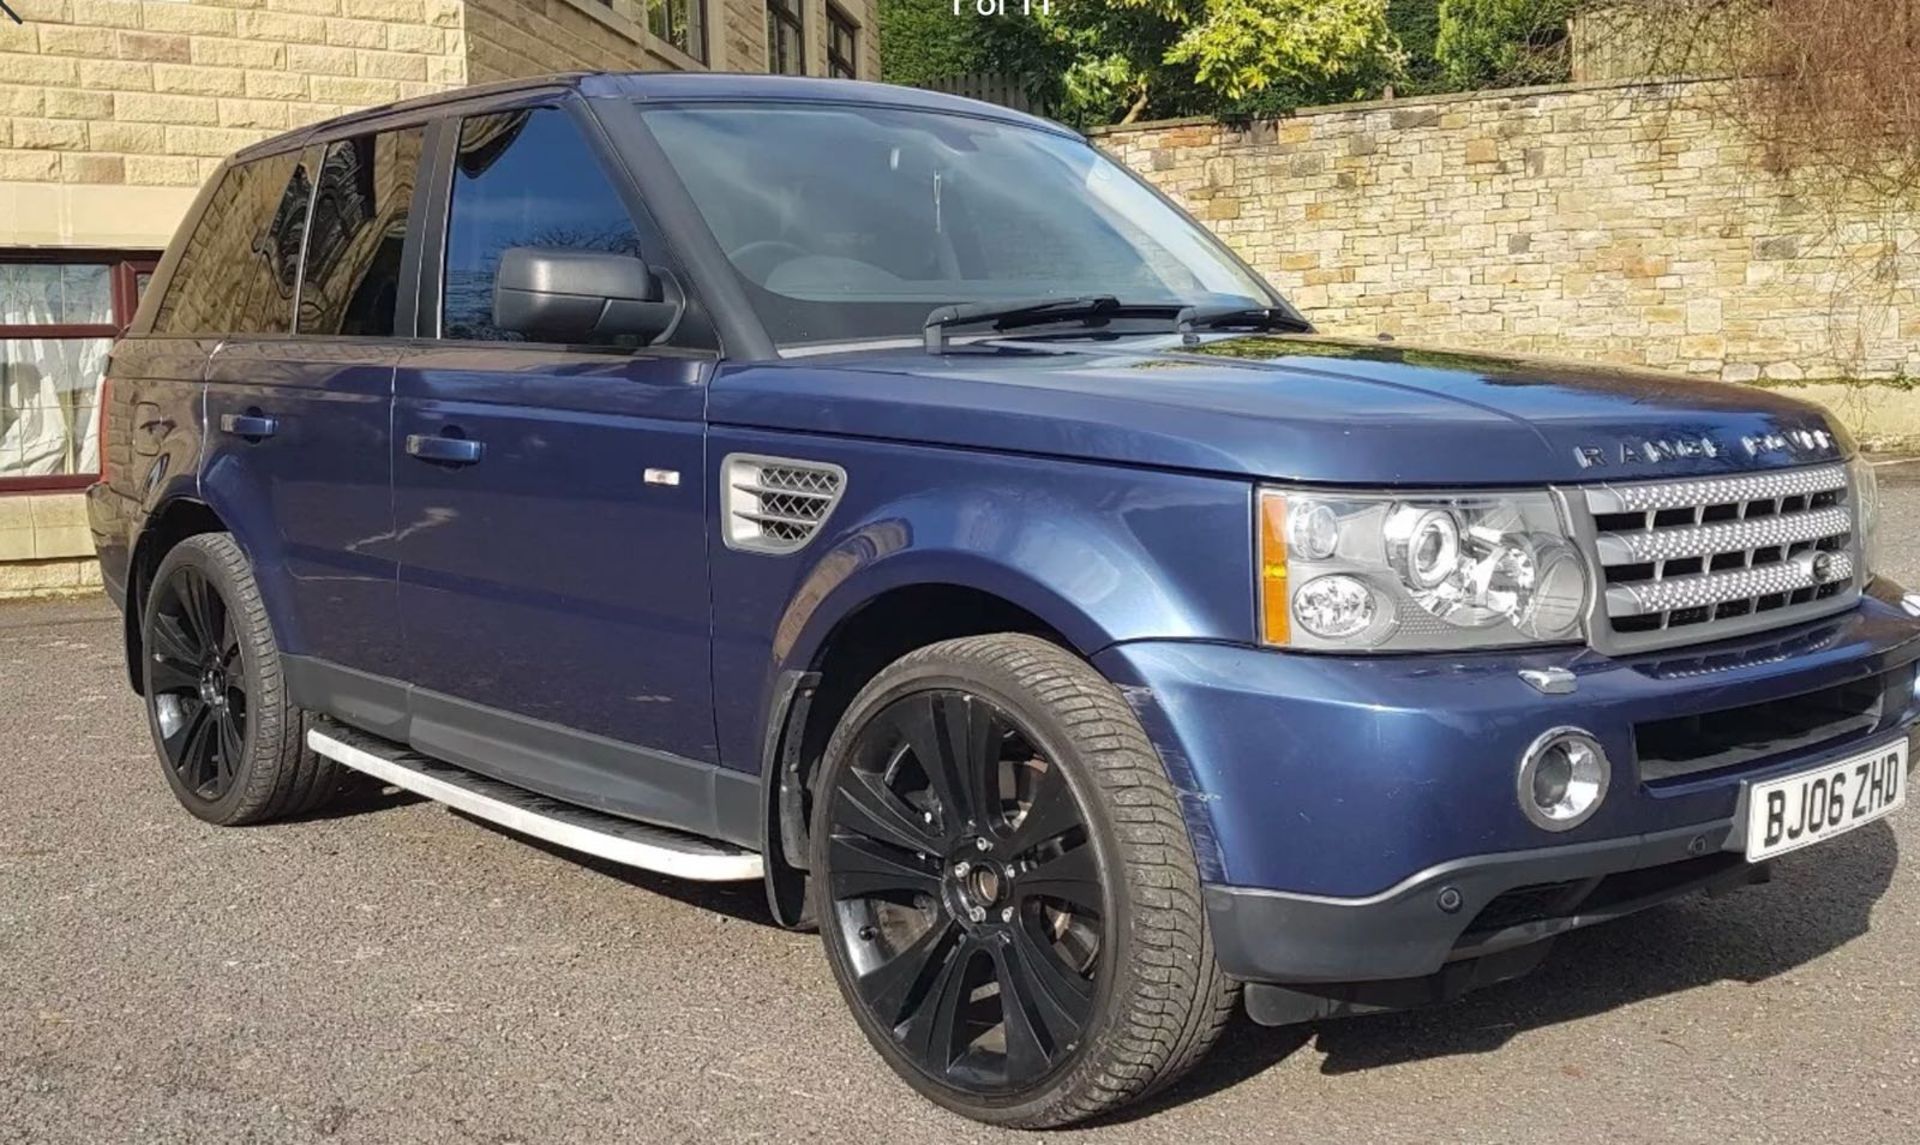 2006/06 REG LAND ROVER RANGE ROVER SPORT V8 SUPER CHARGED STD AUTOMATIC